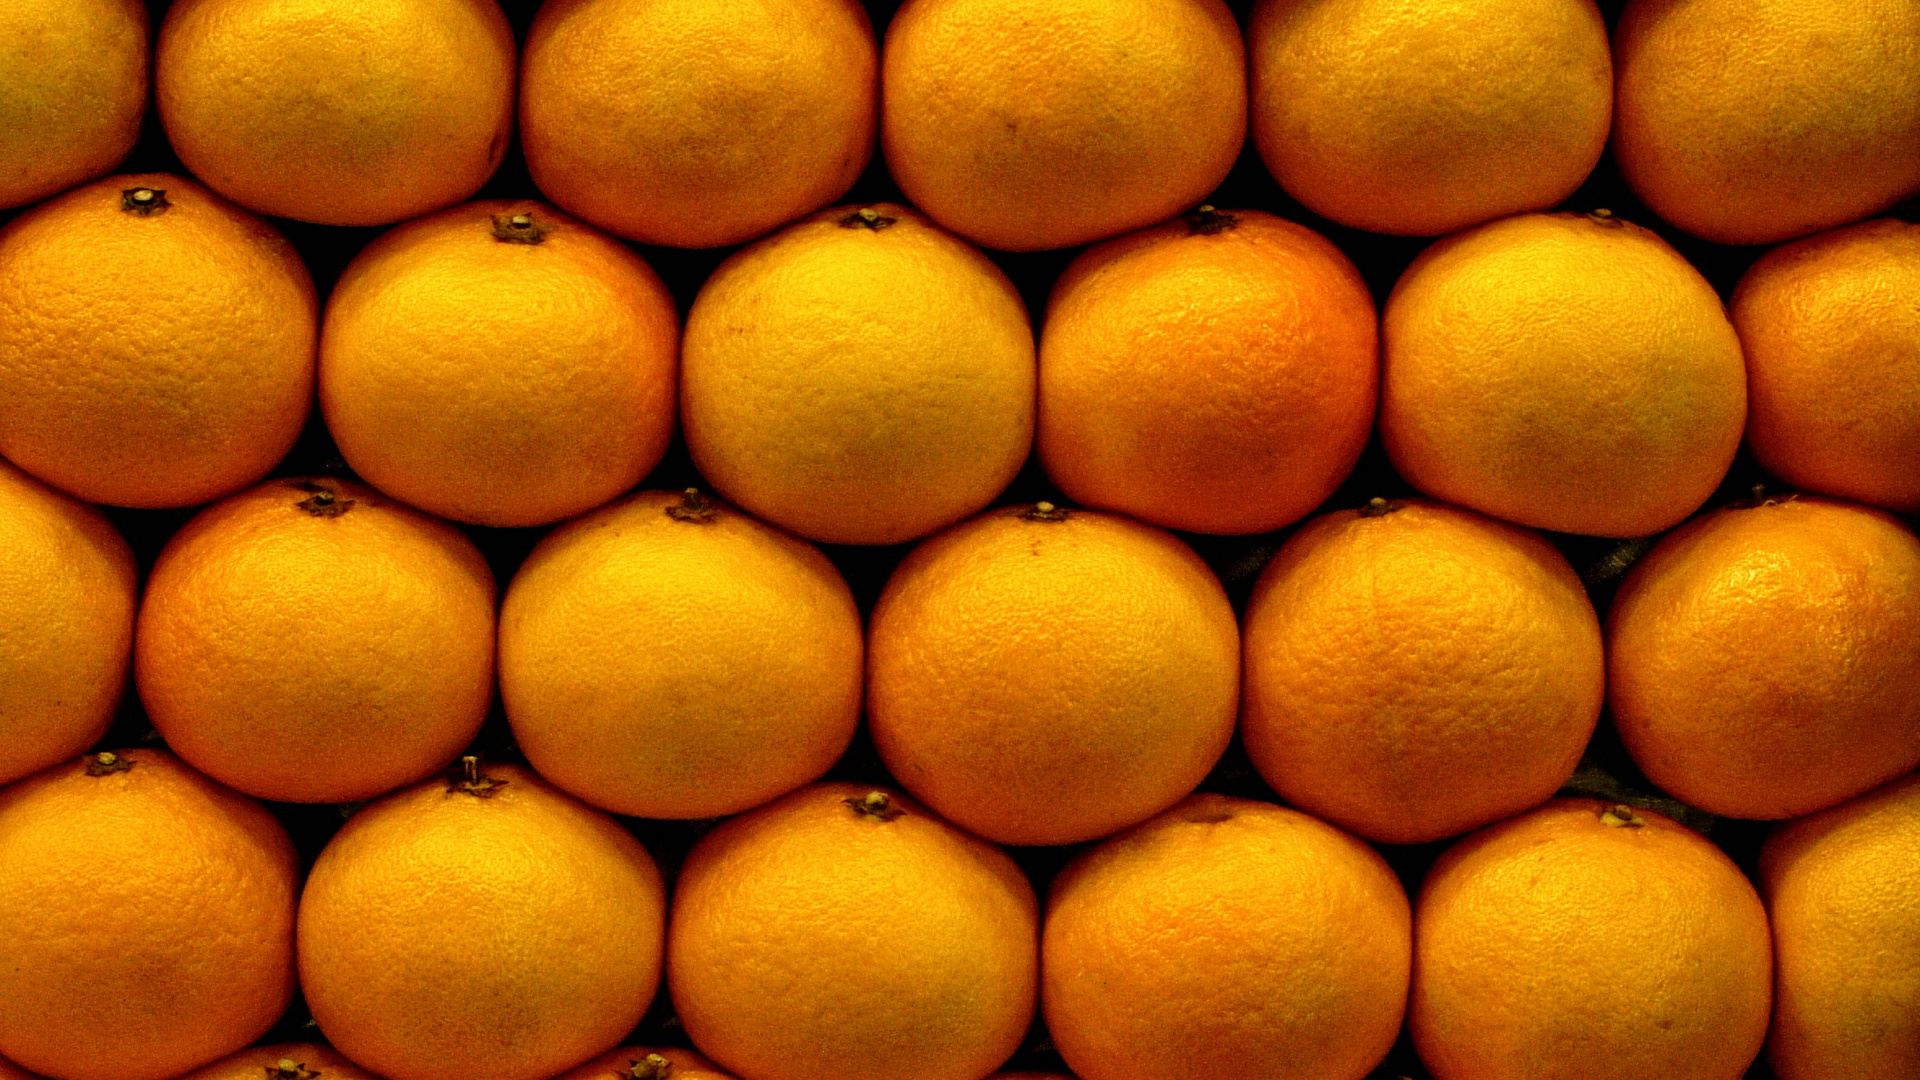 Yellow Round Fruits on White Surface. Wallpaper in 1920x1080 Resolution